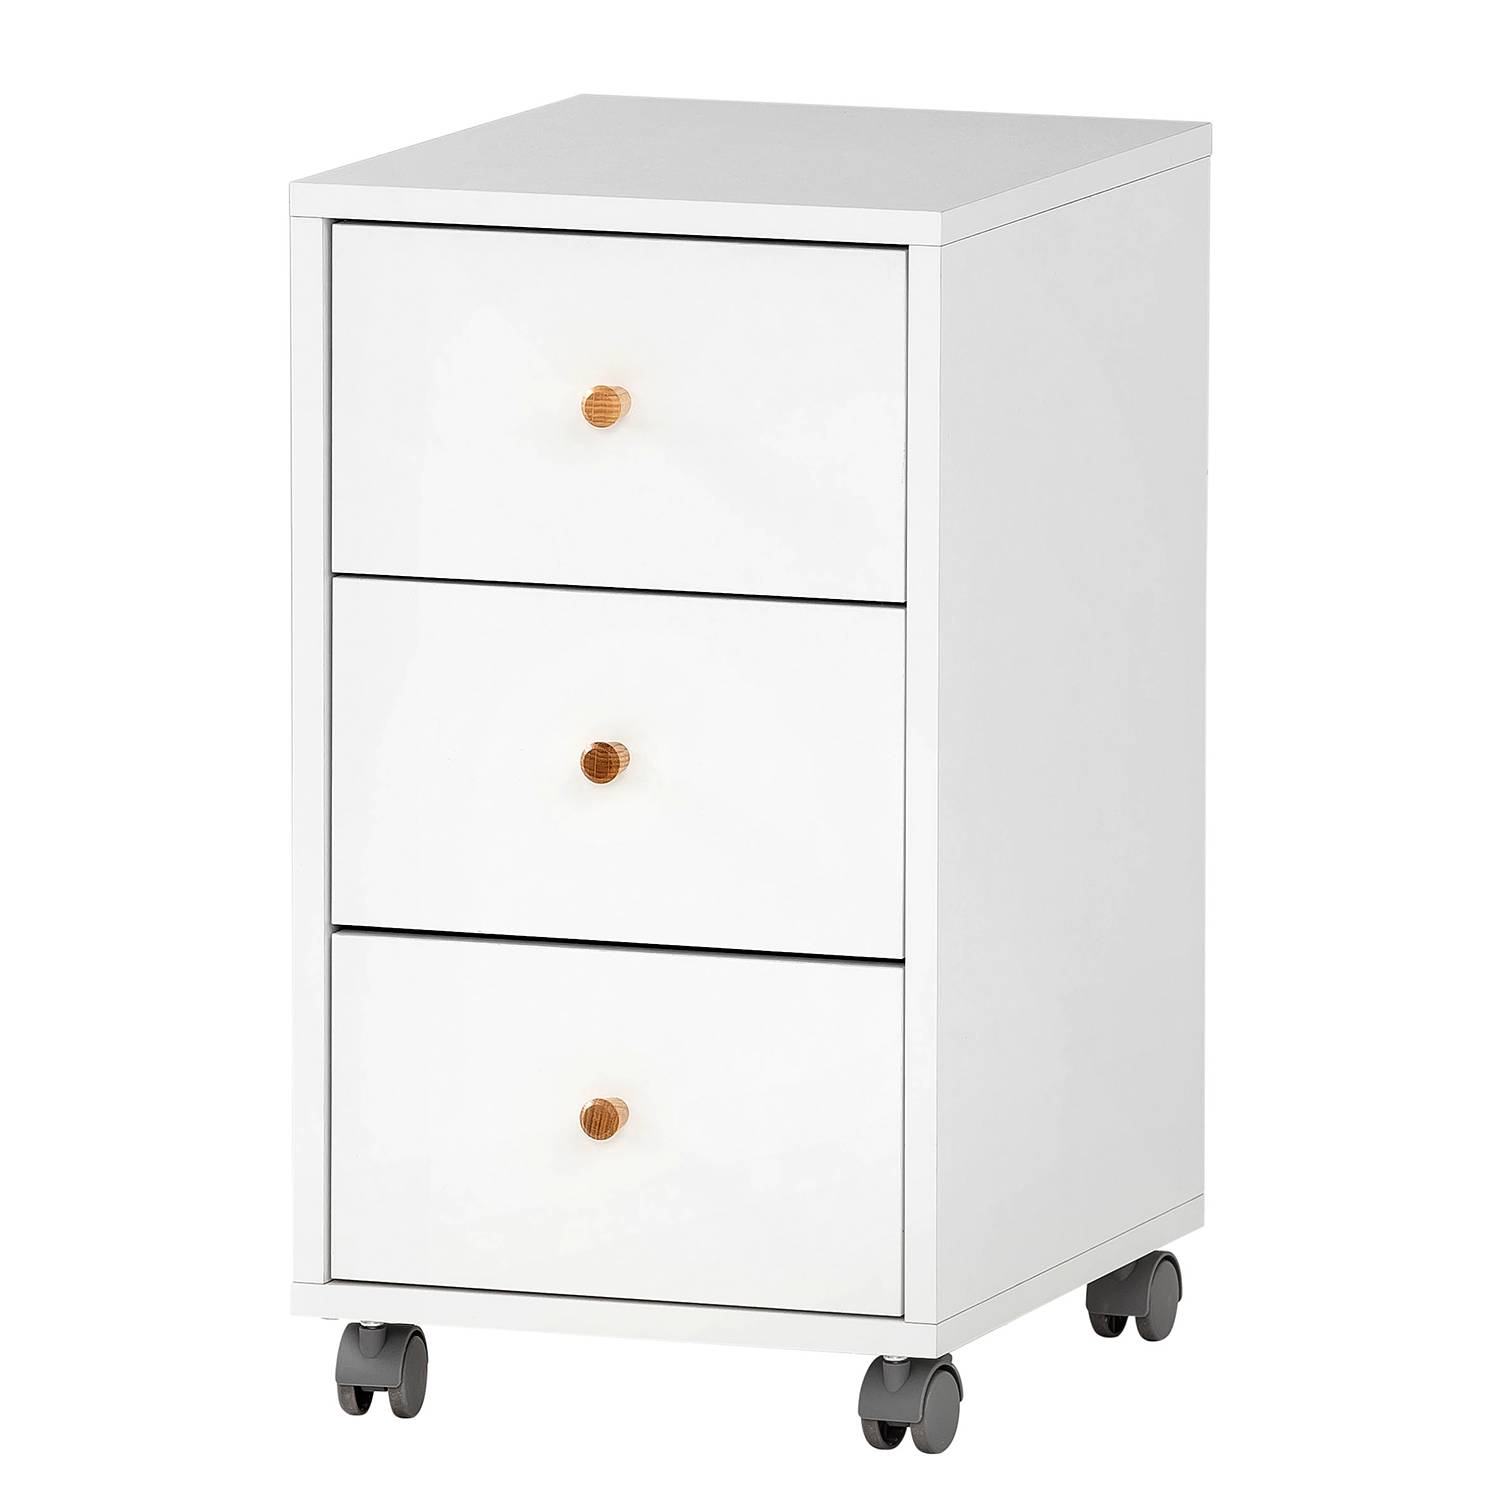 Rollcontainer Serie 500 kaufen | home24